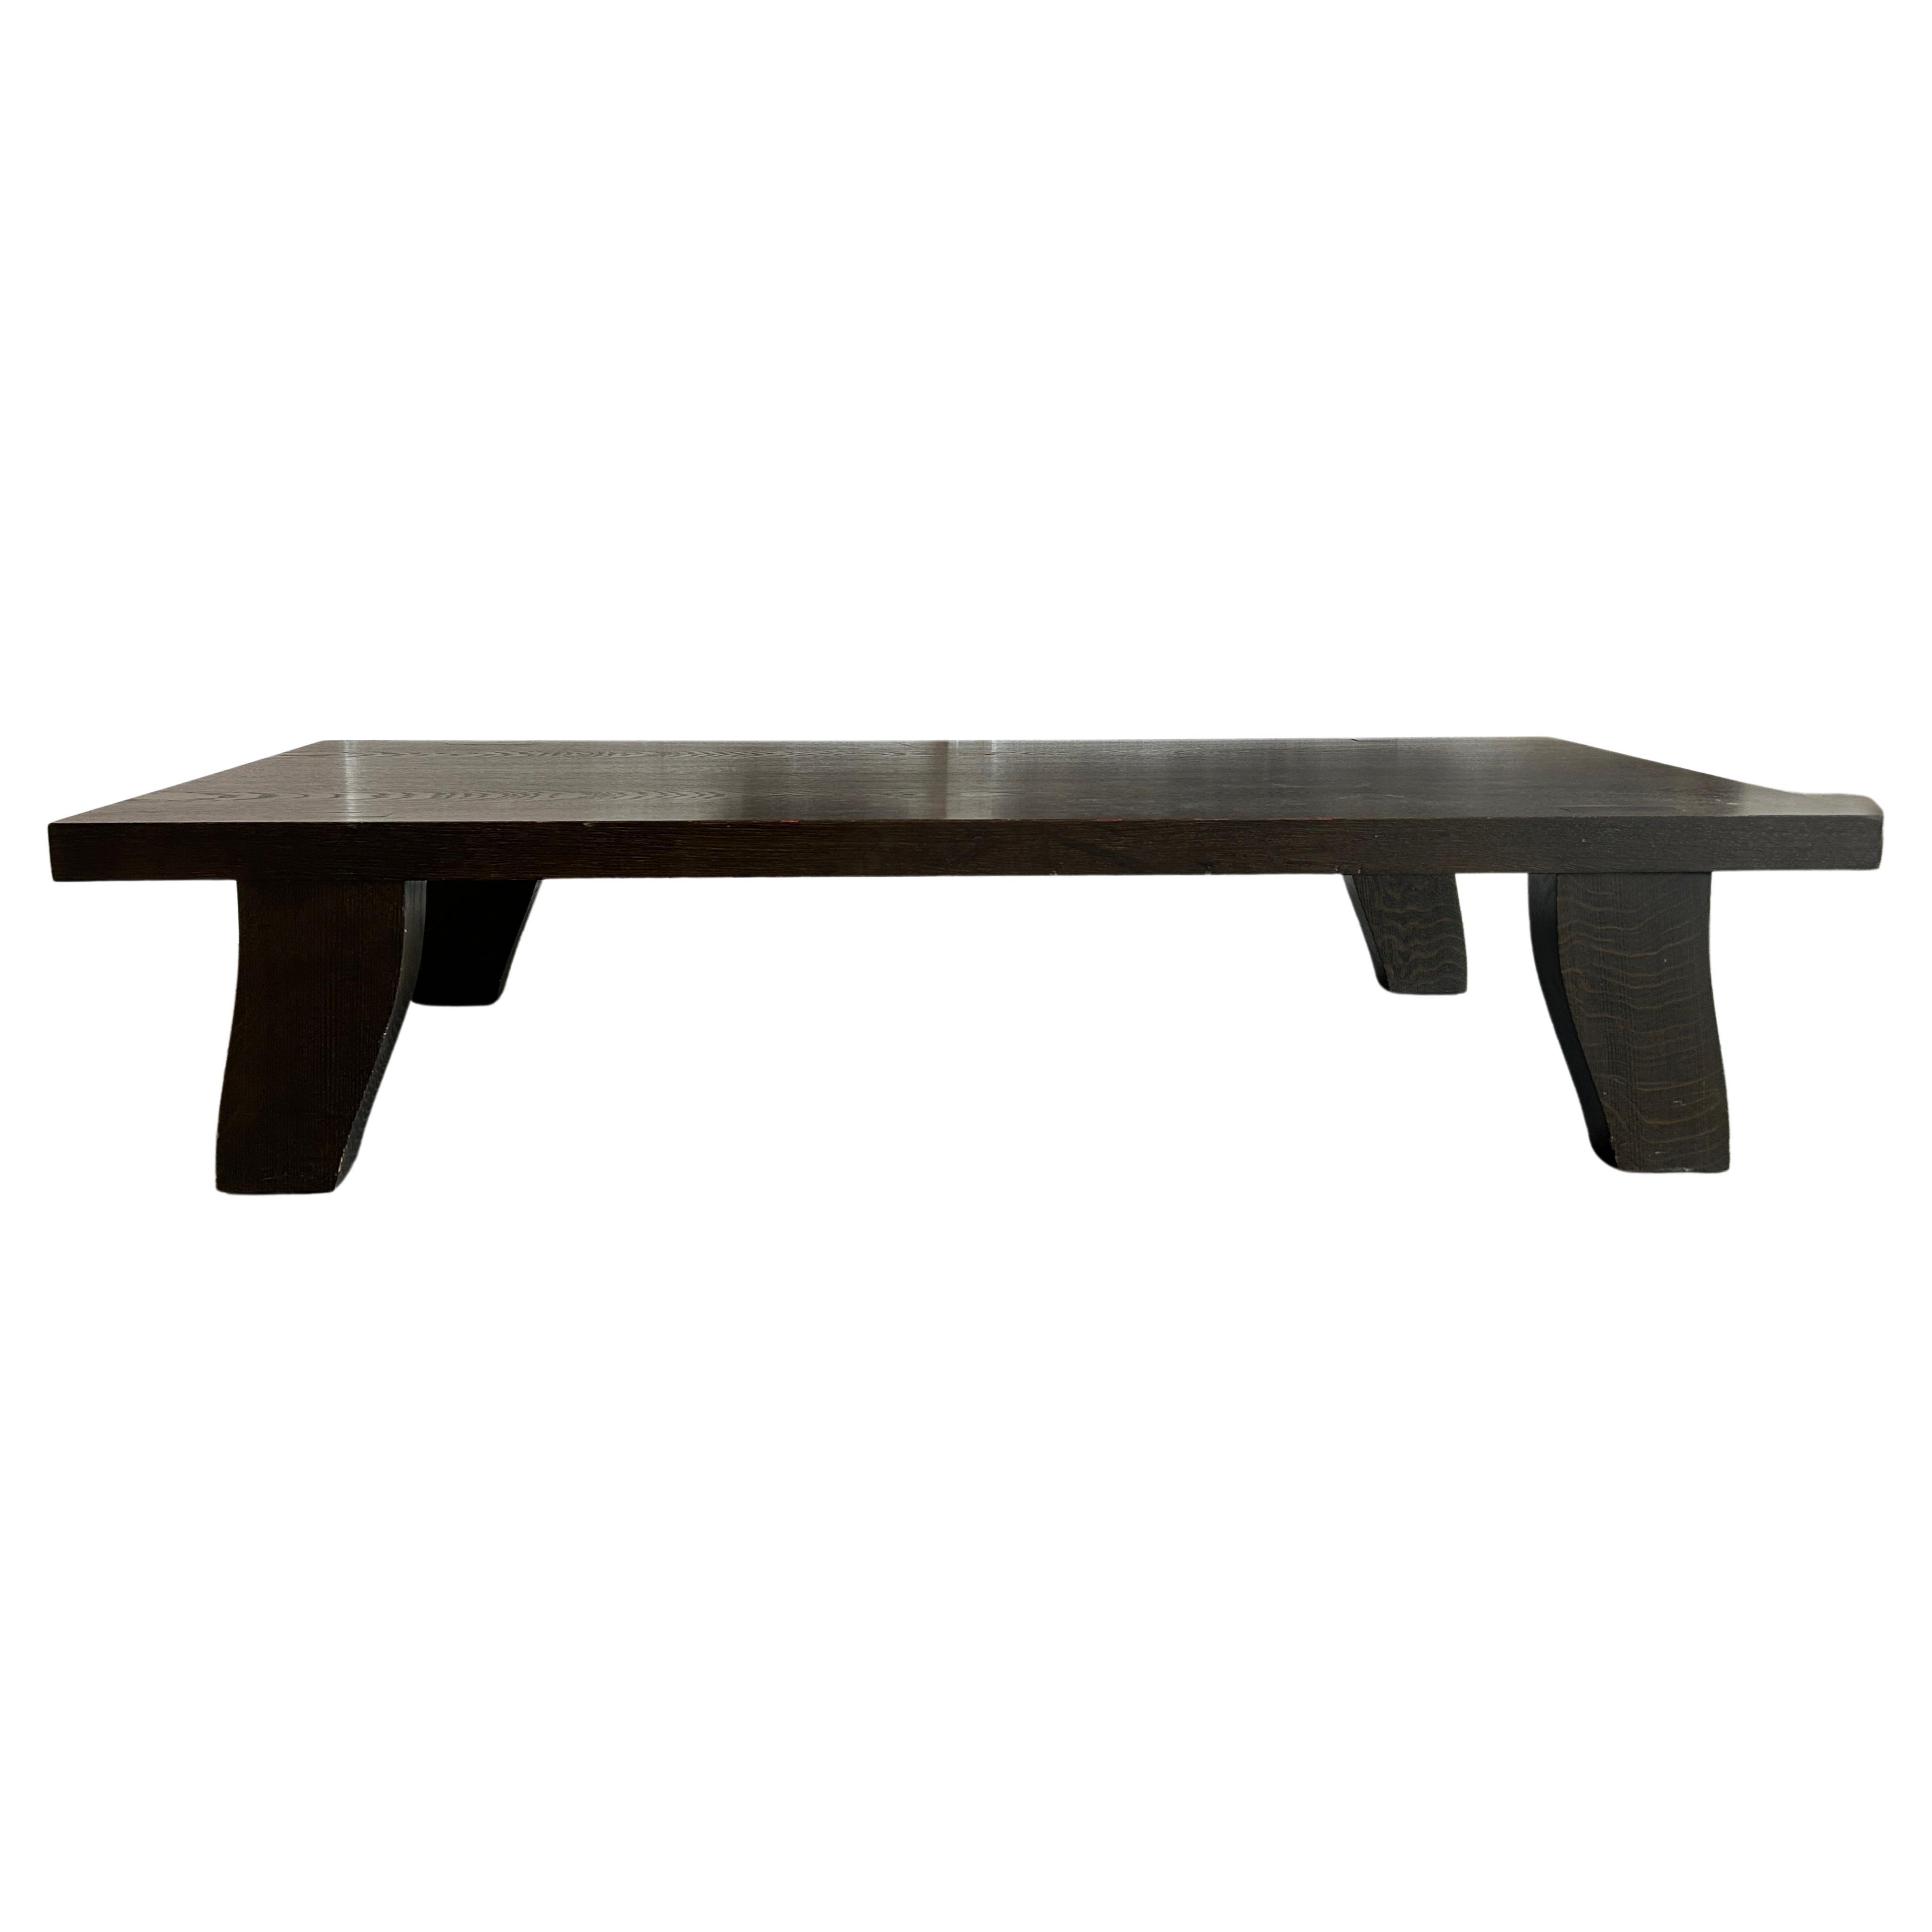 Philippe Hurel Large Low Solid Oak Coffee Table Dark Brown Finish Made in France For Sale